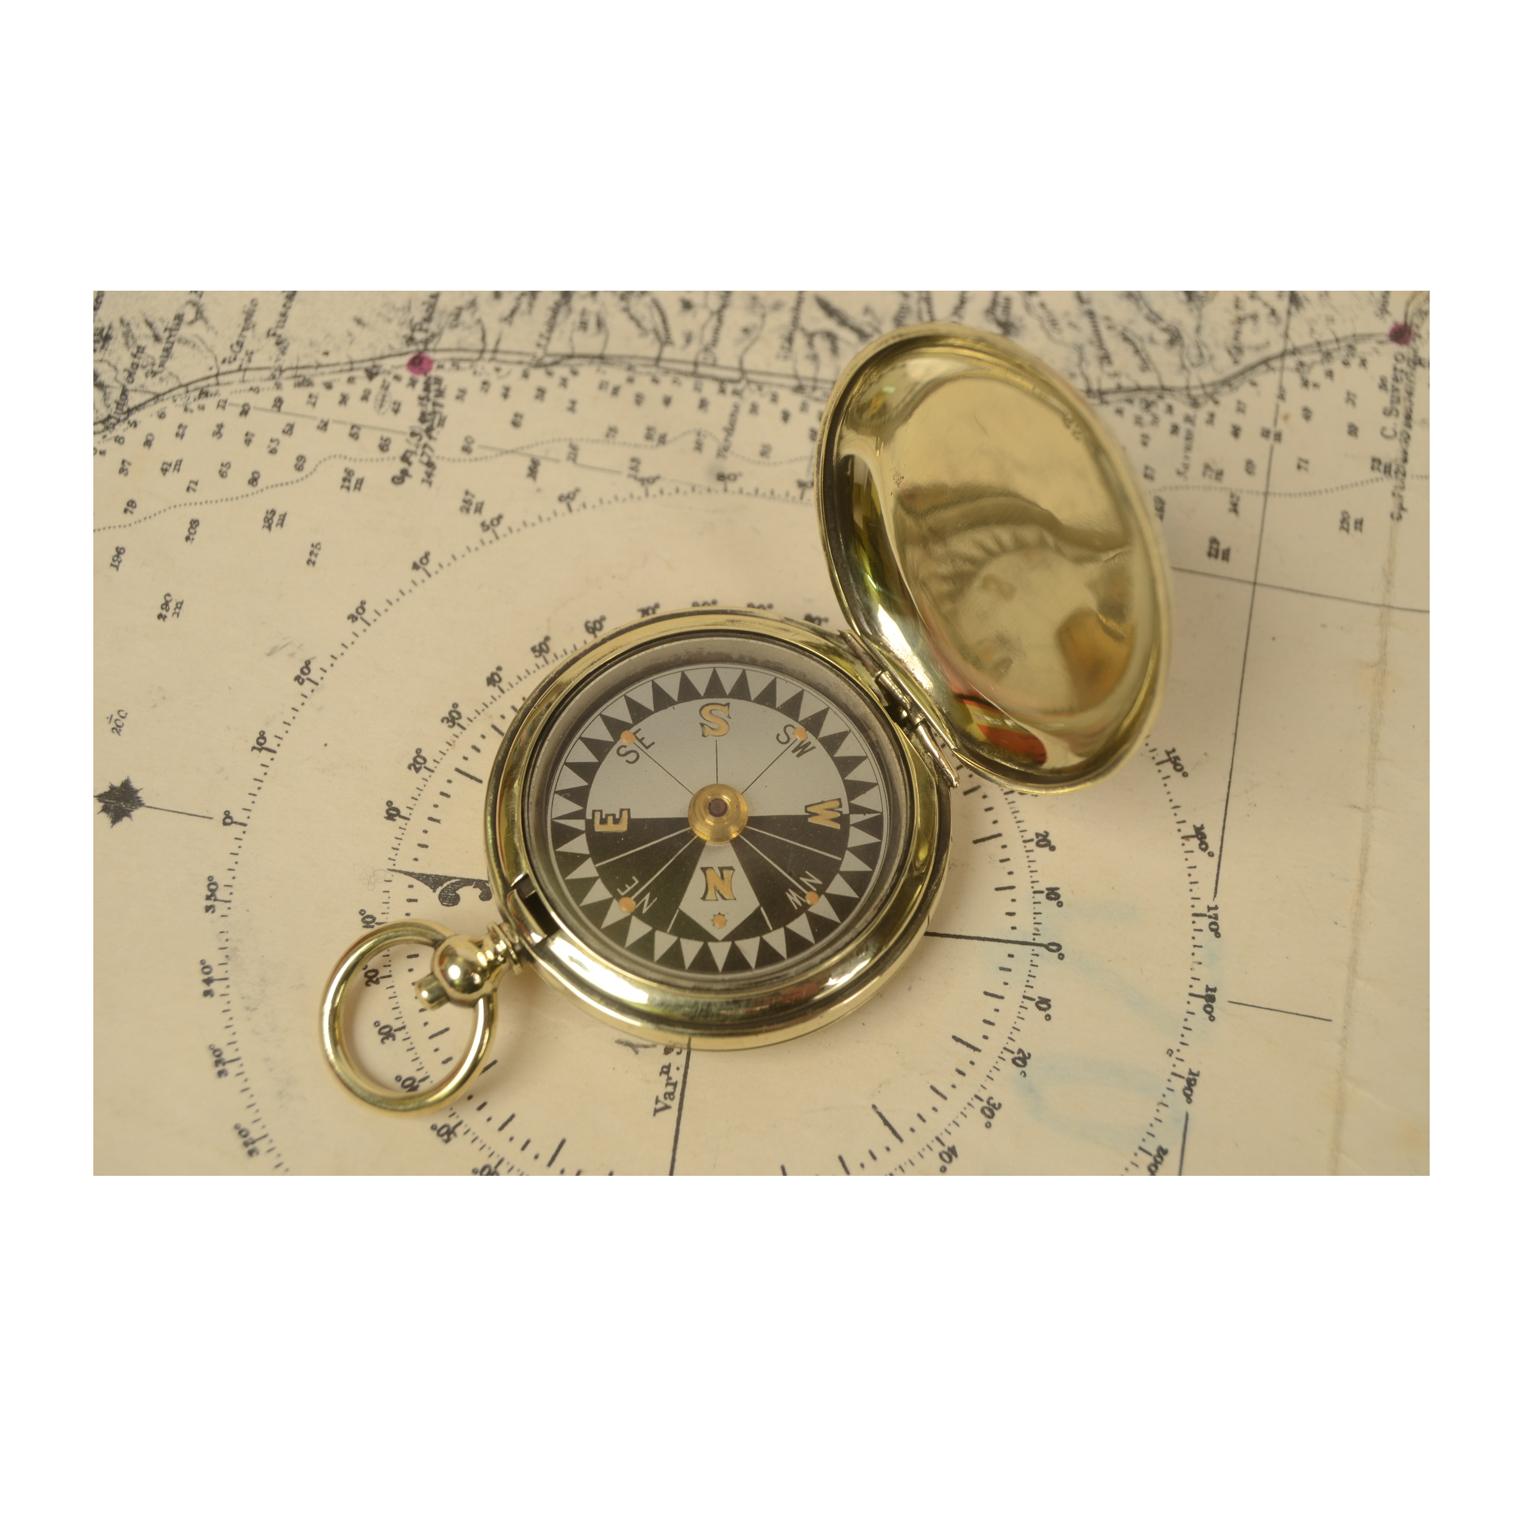 Pocket compass used by RAF officers in the WWI of brass in the shape of a pocket watch. The compass is equipped with a lid with snap closure with release button inside the ring. Compass card with eight winds. In excellent condition, fully